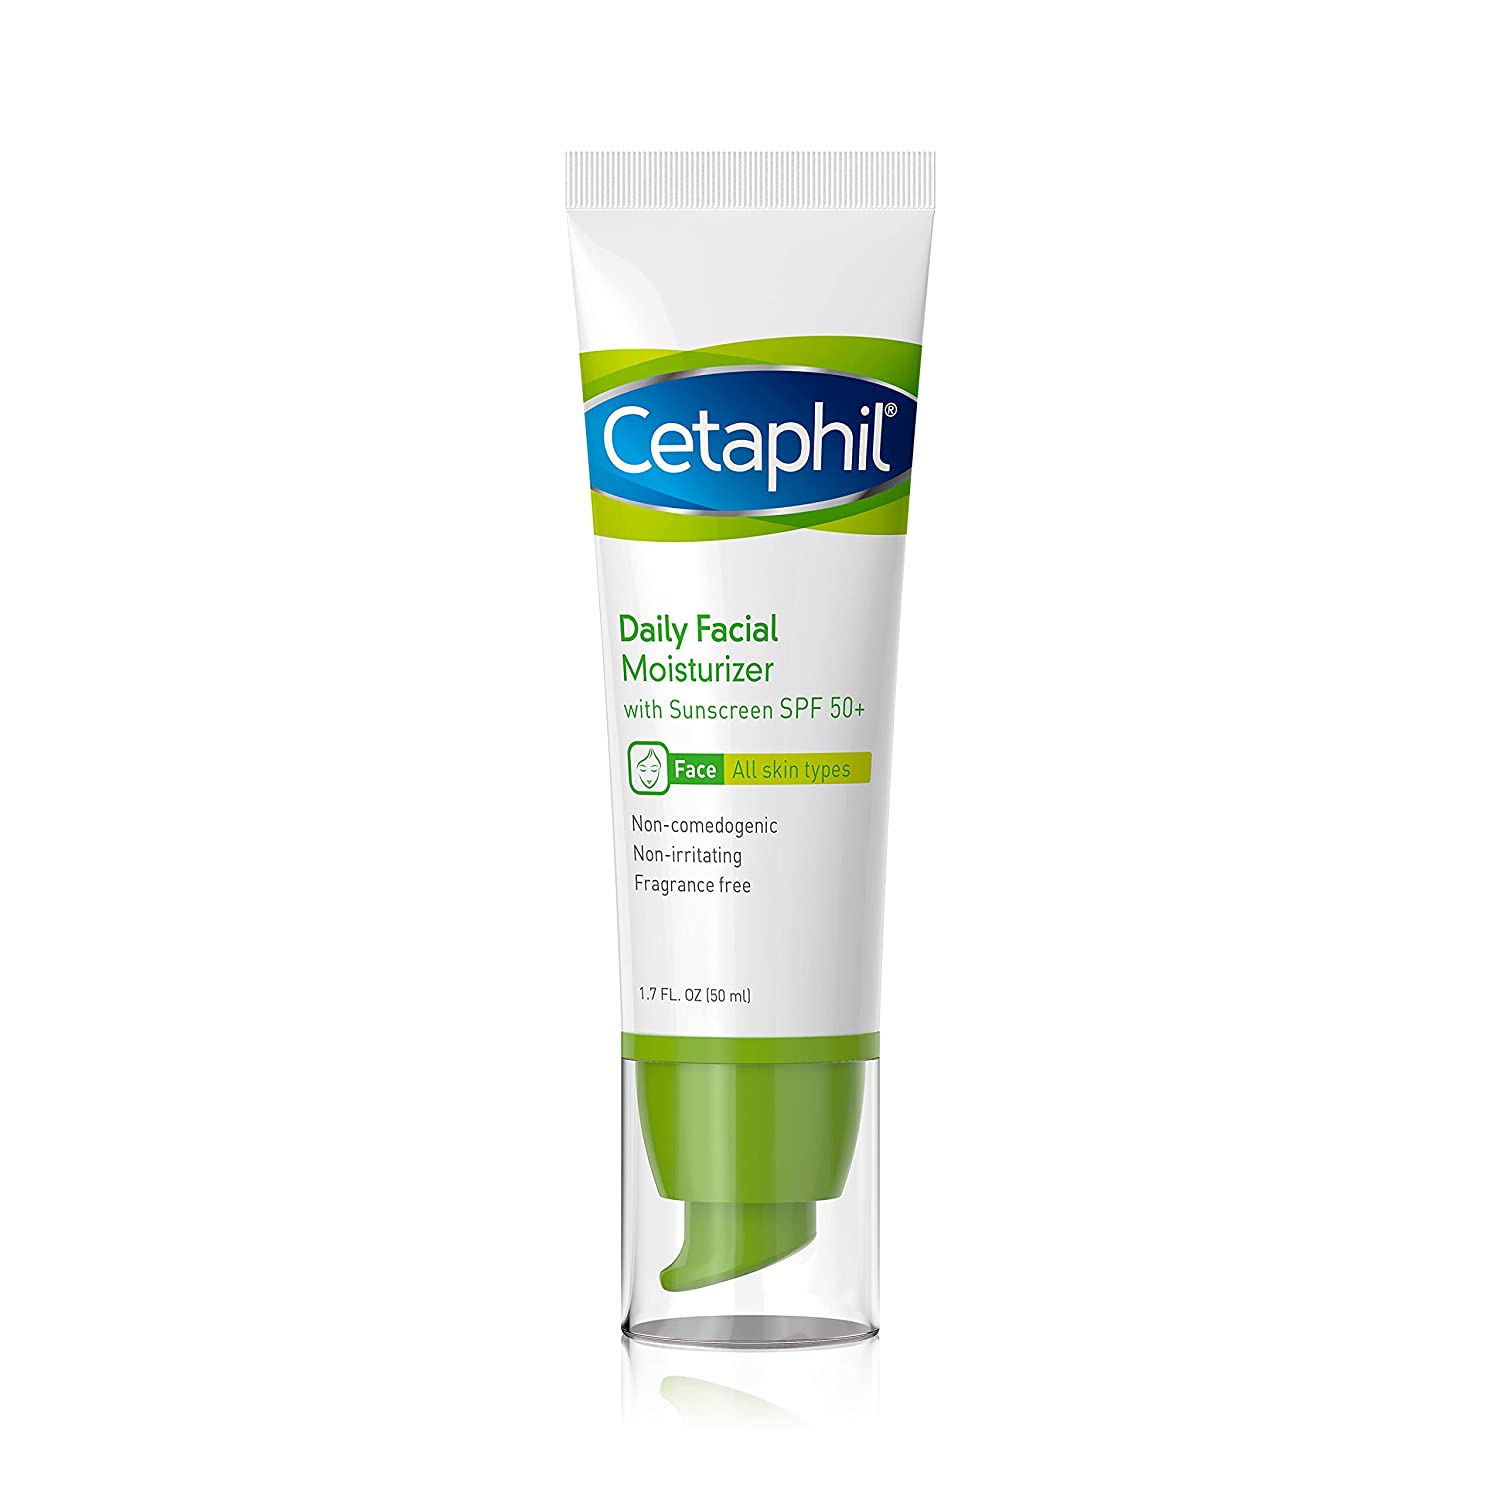 Cetaphil Daily Facial Moisturizer for All Skin Types, with Sunscreen SPF 50 1.7 oz (Pack of 3) - image 4 of 7